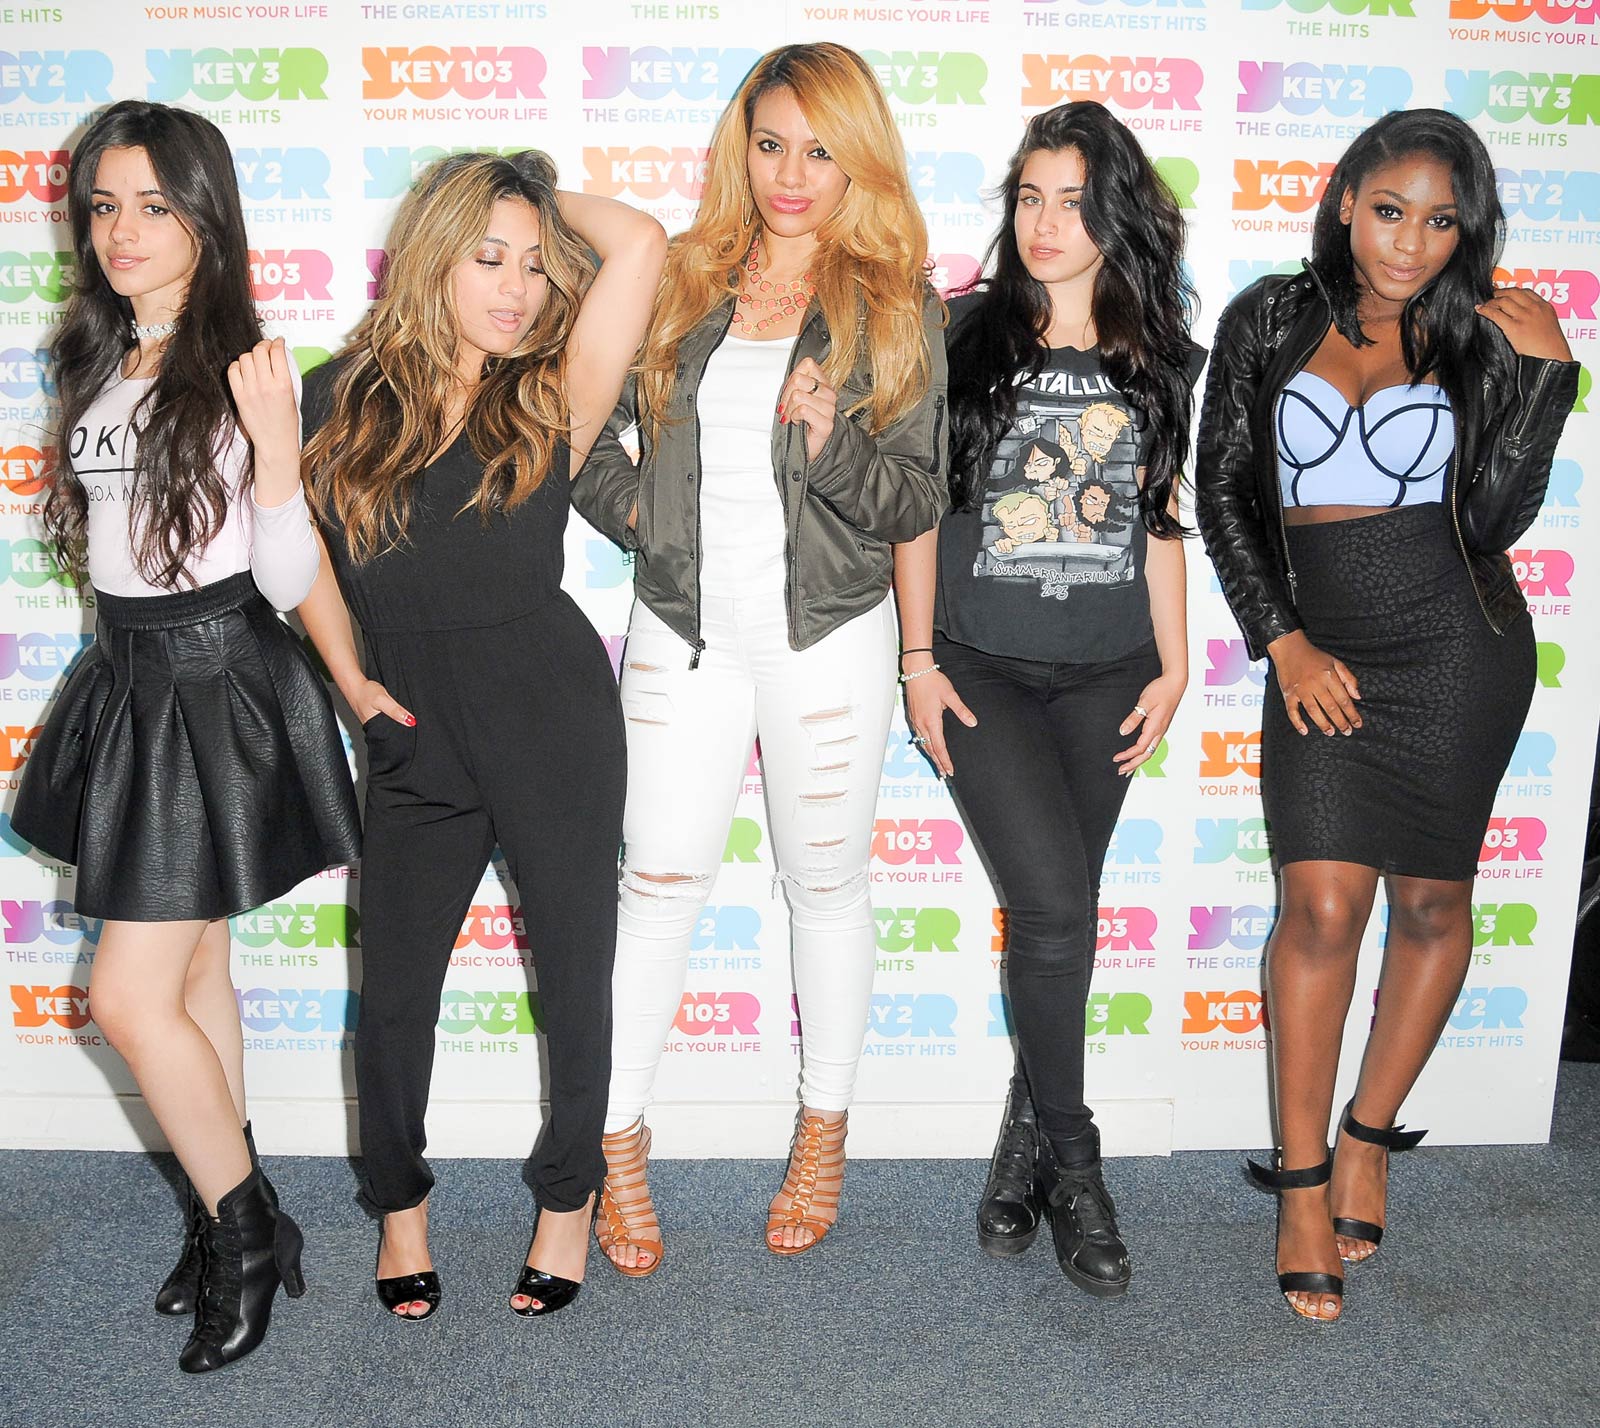 Fifth Harmony at Radio Station Key 103 in Manchester